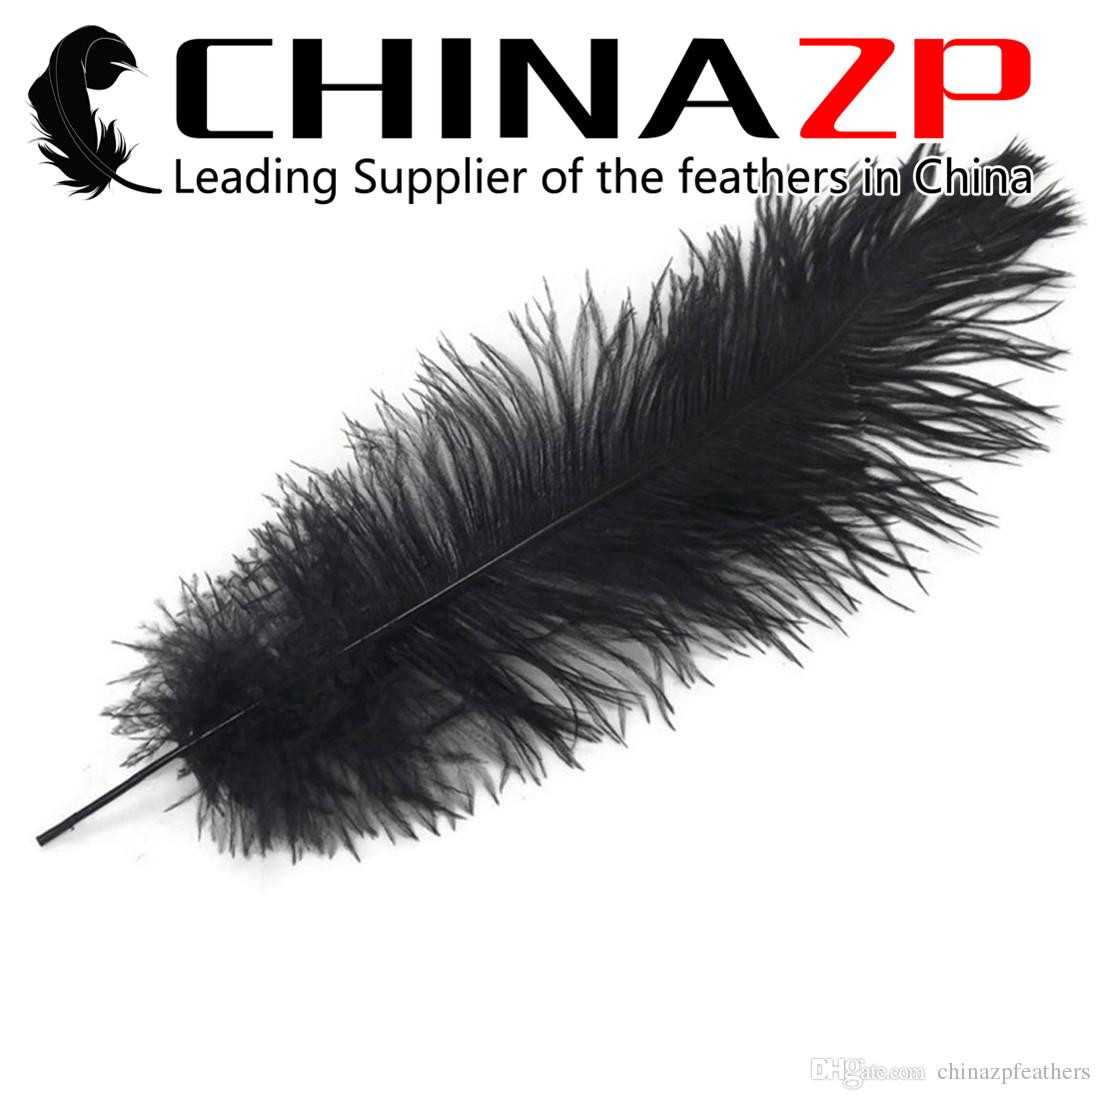 21 Lovable Peacock Feathers In Vase 2024 free download peacock feathers in vase of chinazp factory large size 50 55cm20 22inch good quality dyed black intended for chinazp factory large size 50 55cm20 22inch good quality dyed black ostrich feath